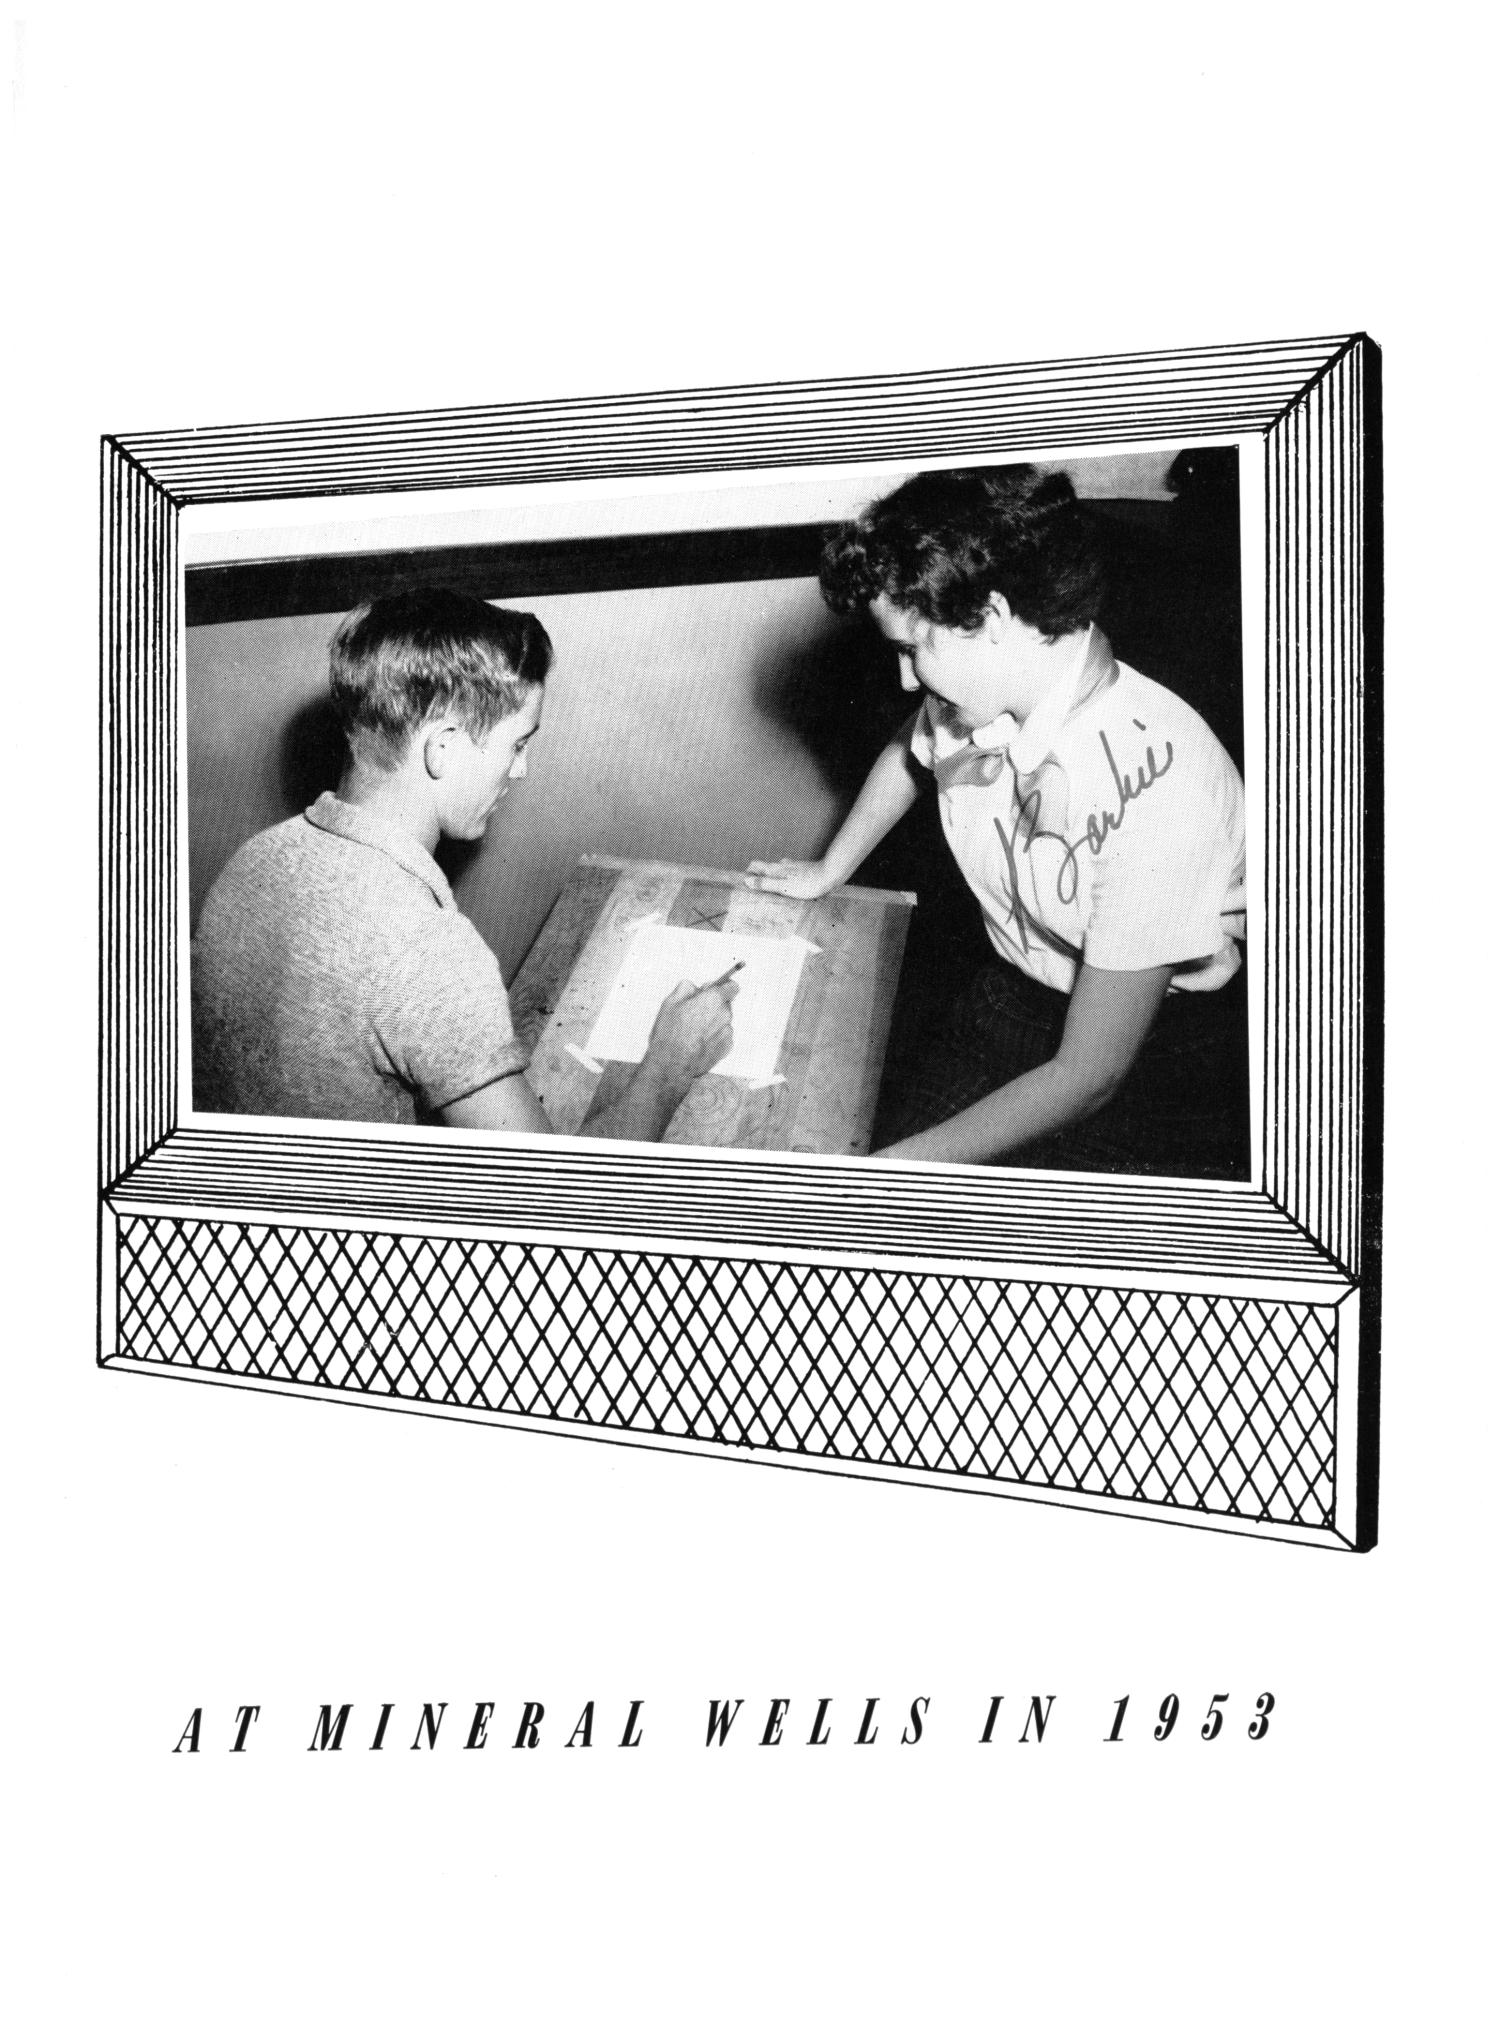 The Burro, Yearbook of Mineral Wells High School, 1953
                                                
                                                    101
                                                